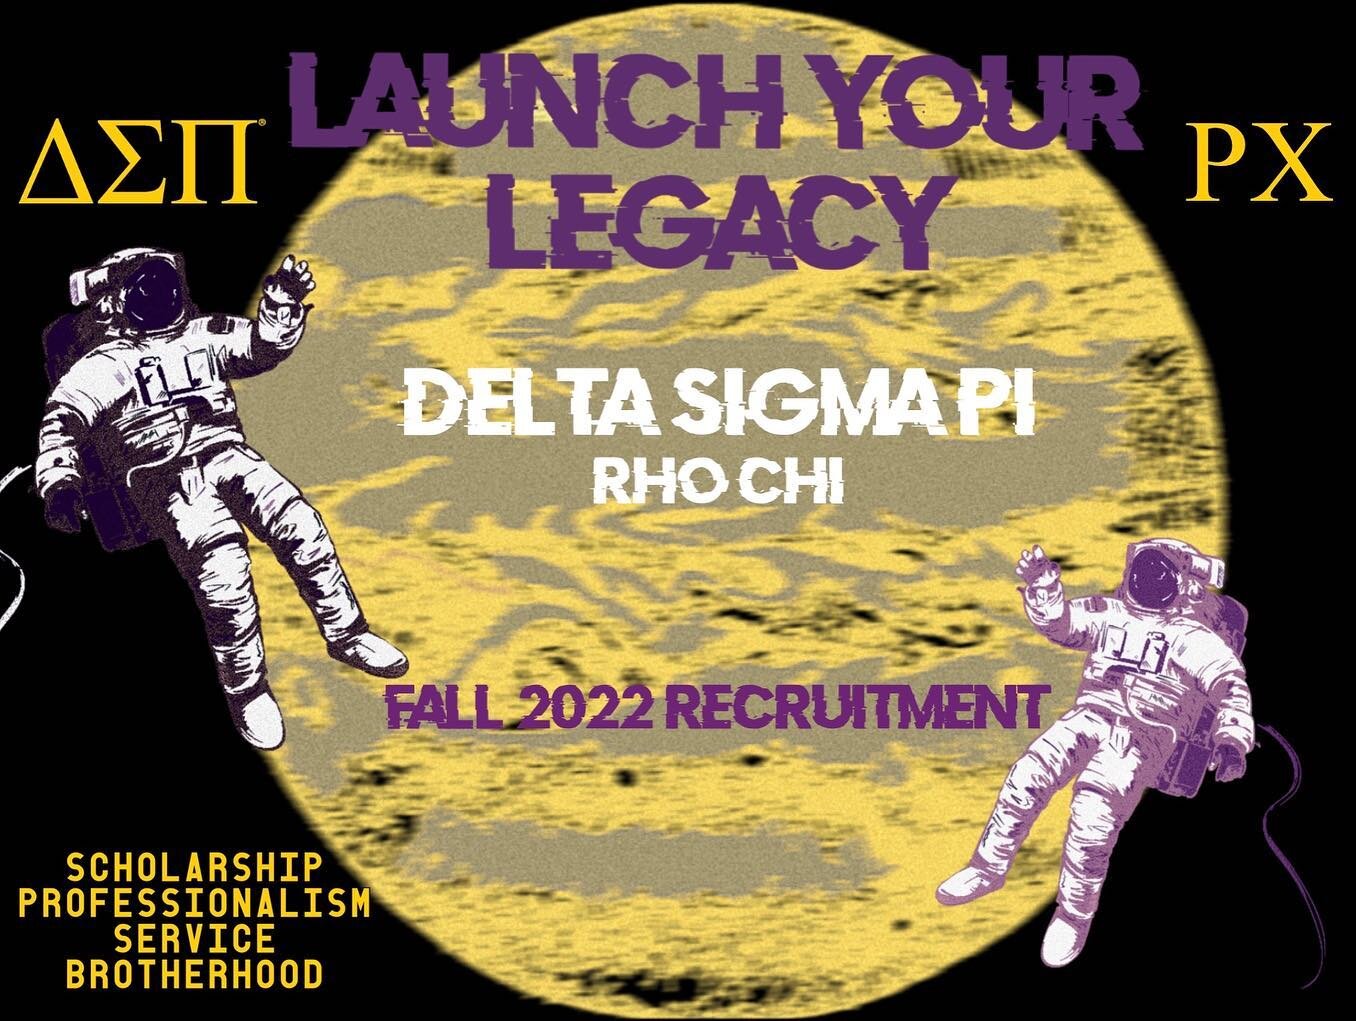 Launch Your Legacy with Delta Sigma Pi this Fall 22' Semester.

Delta Sigma Pi is a co-ed professional business fraternity organized to foster the study of business in universities, and we can't wait to expand our brotherhood this semester.

Countdow